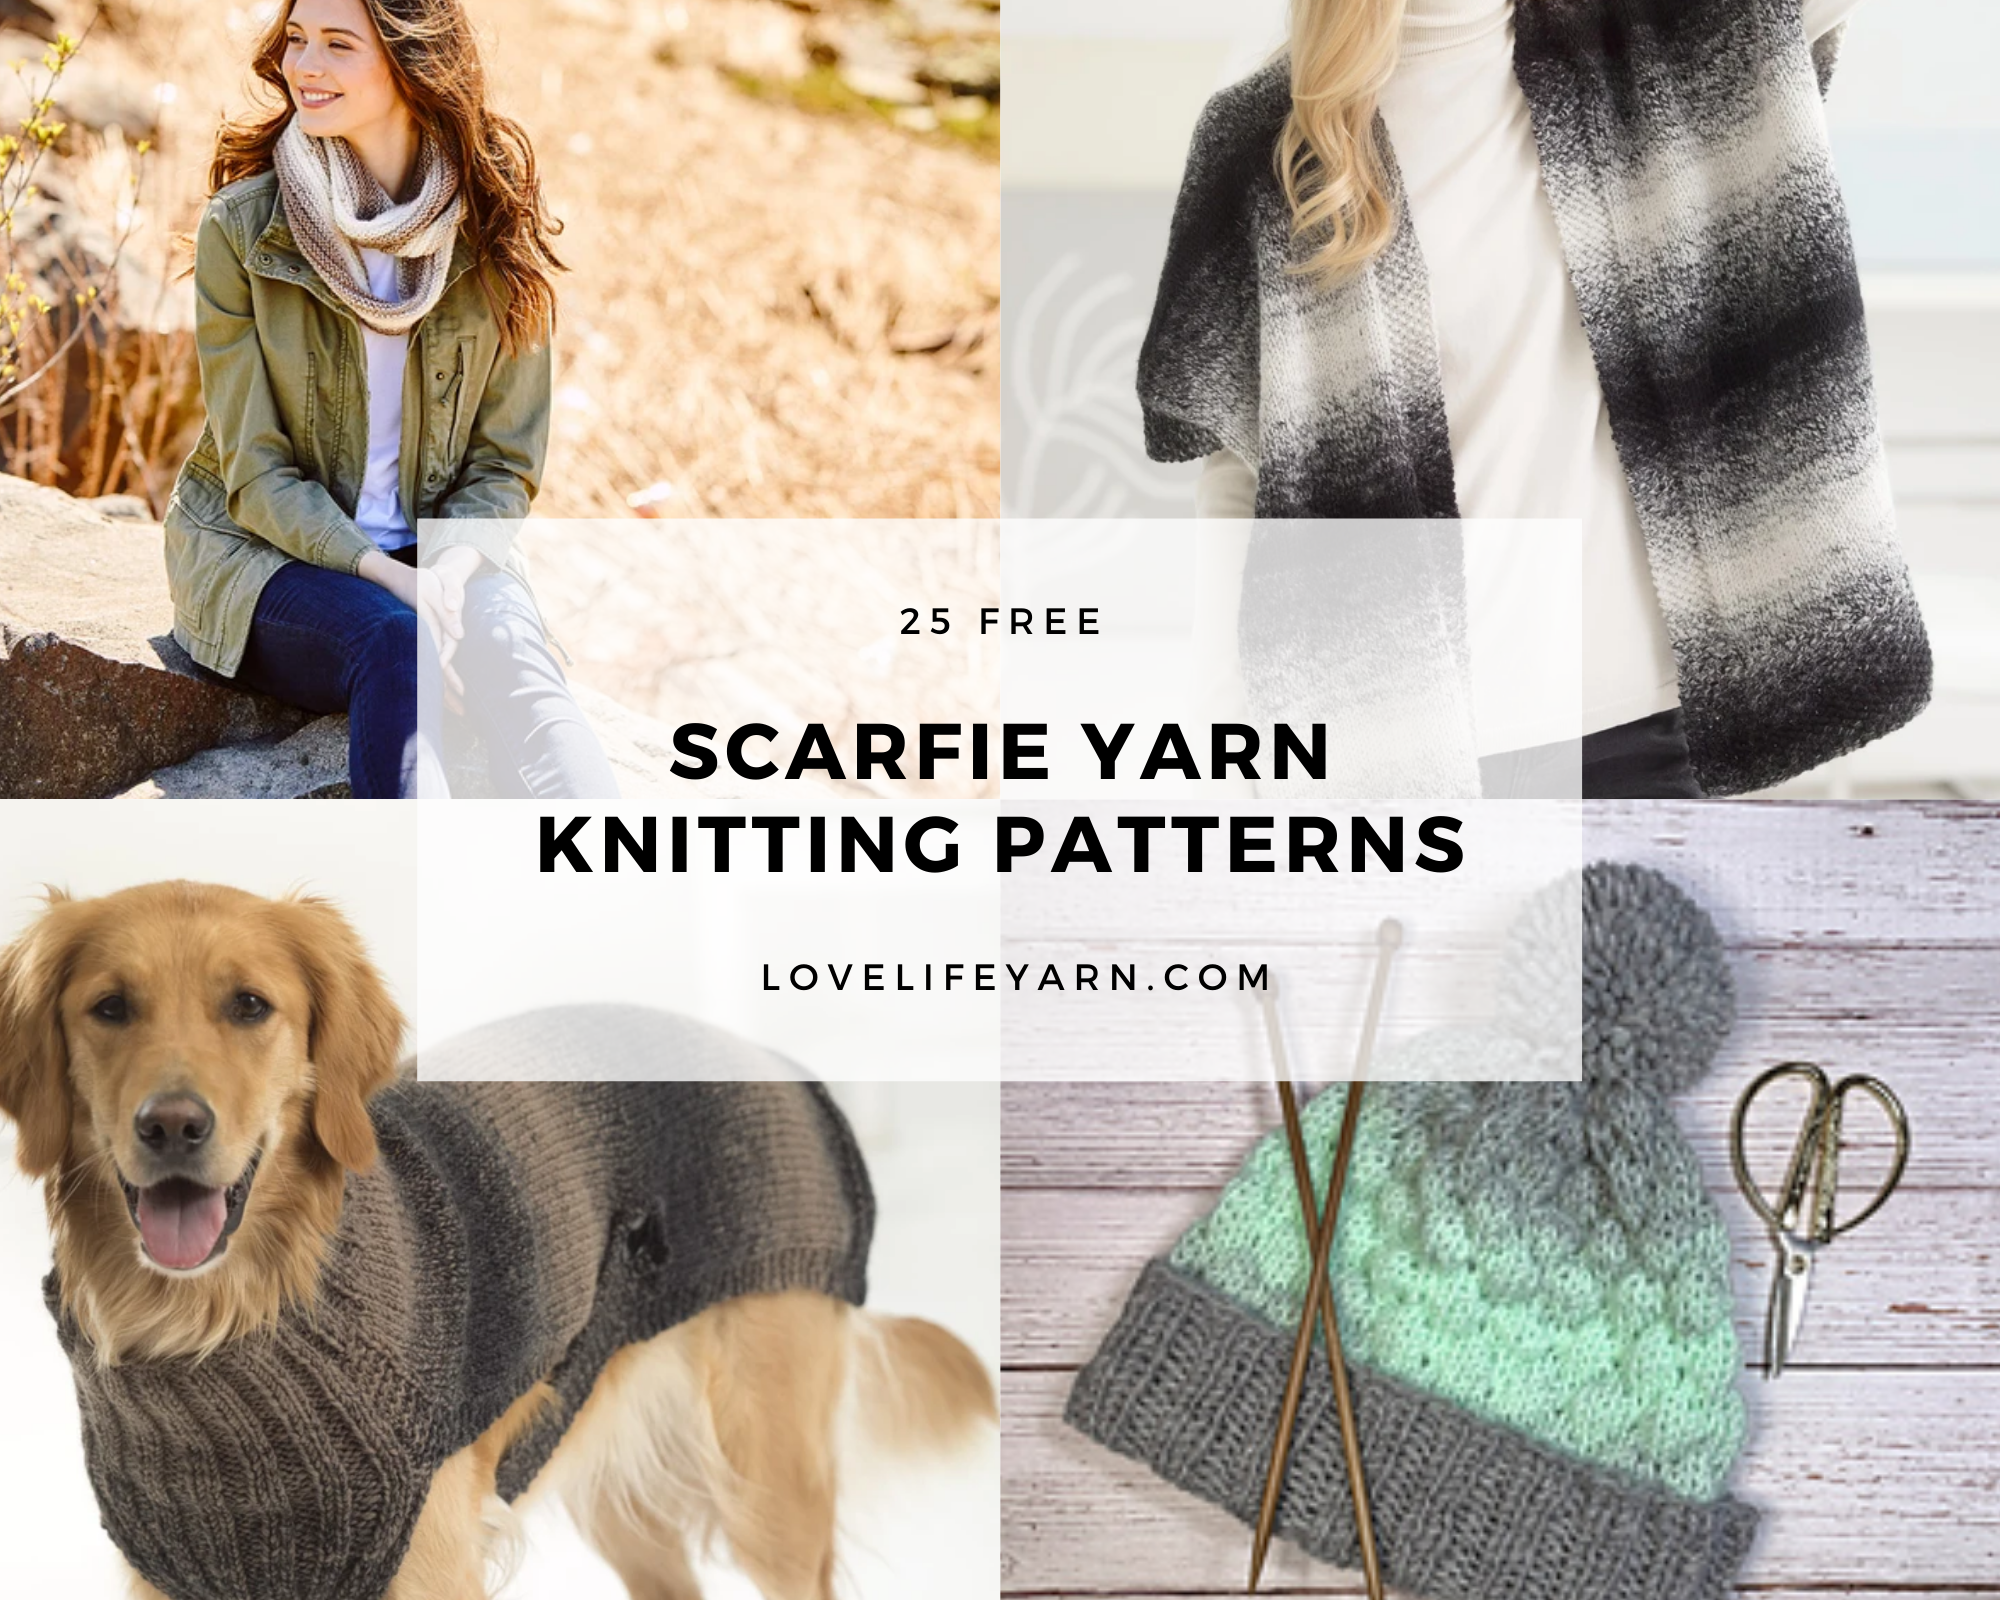 What Is Your Animal Spirit? Yarn Review